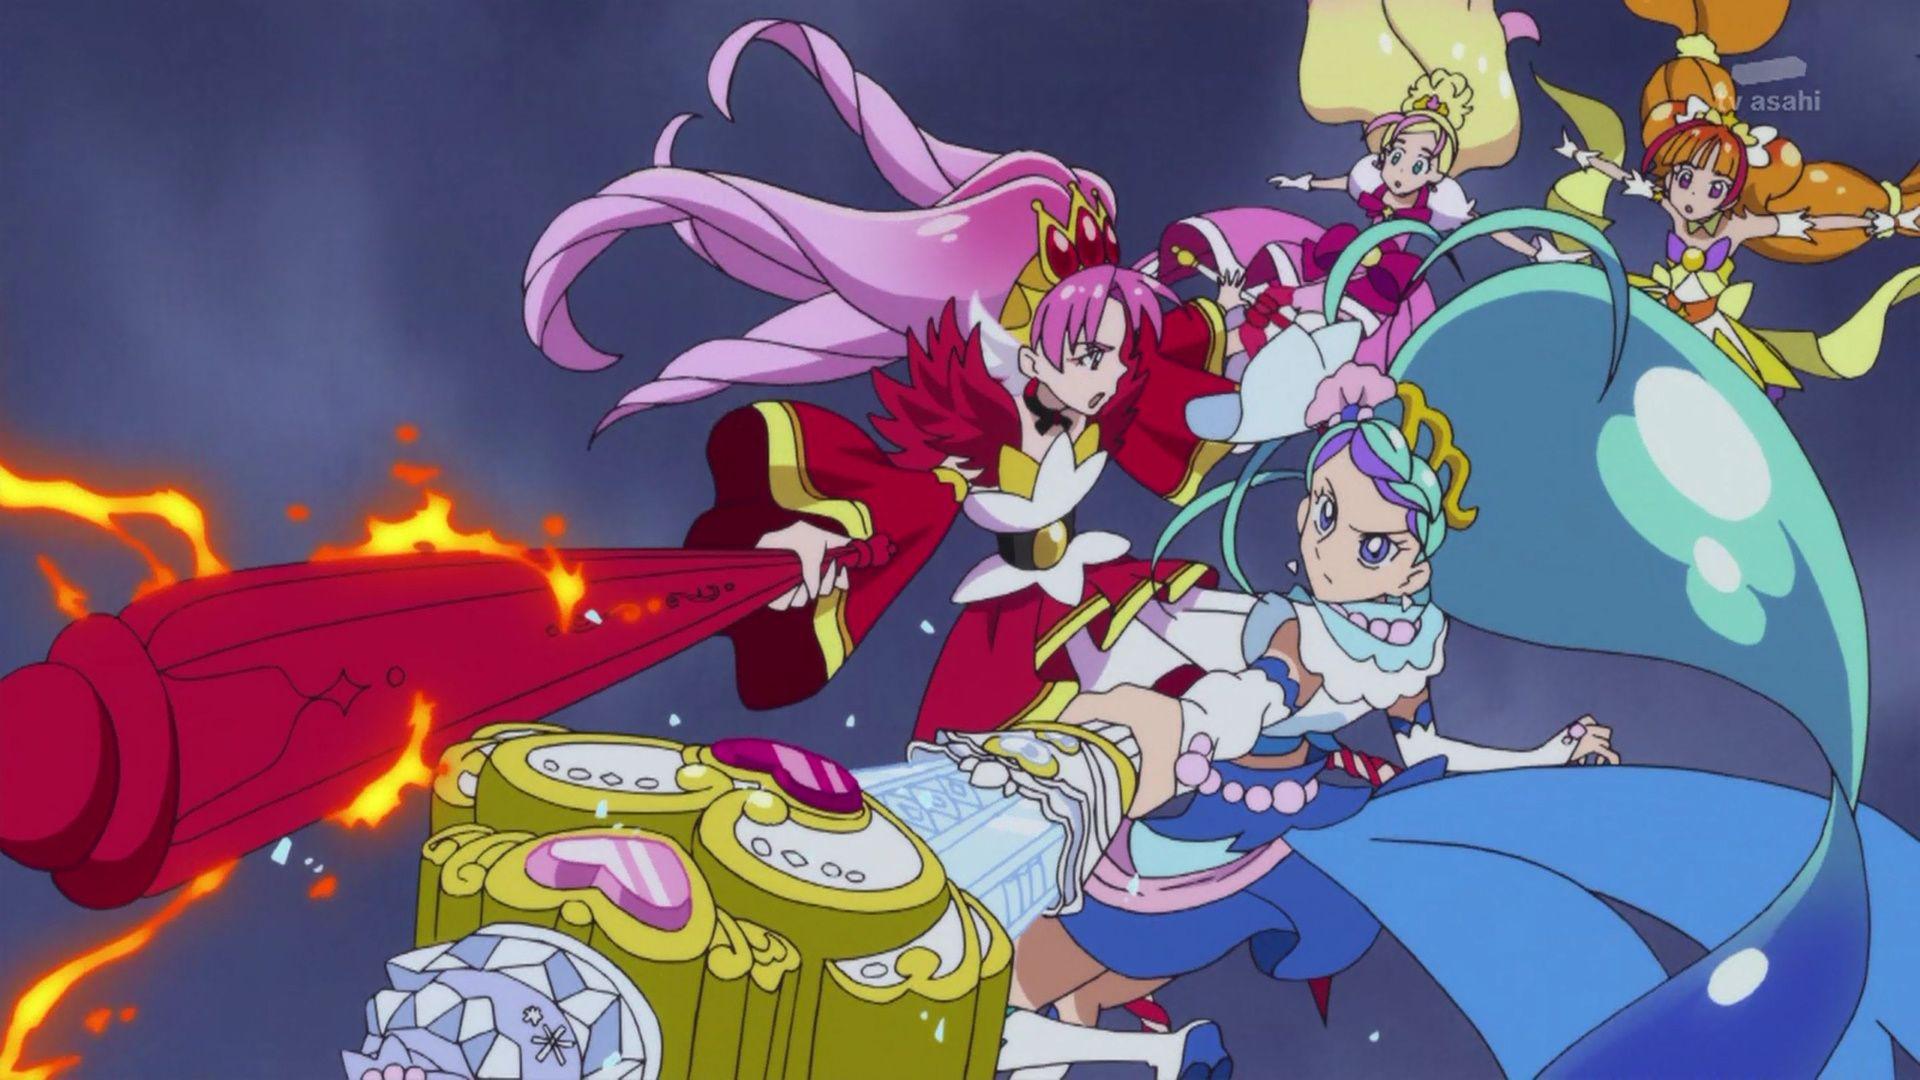 Scarlet and Mermaid defend Twinkle and. Pretty